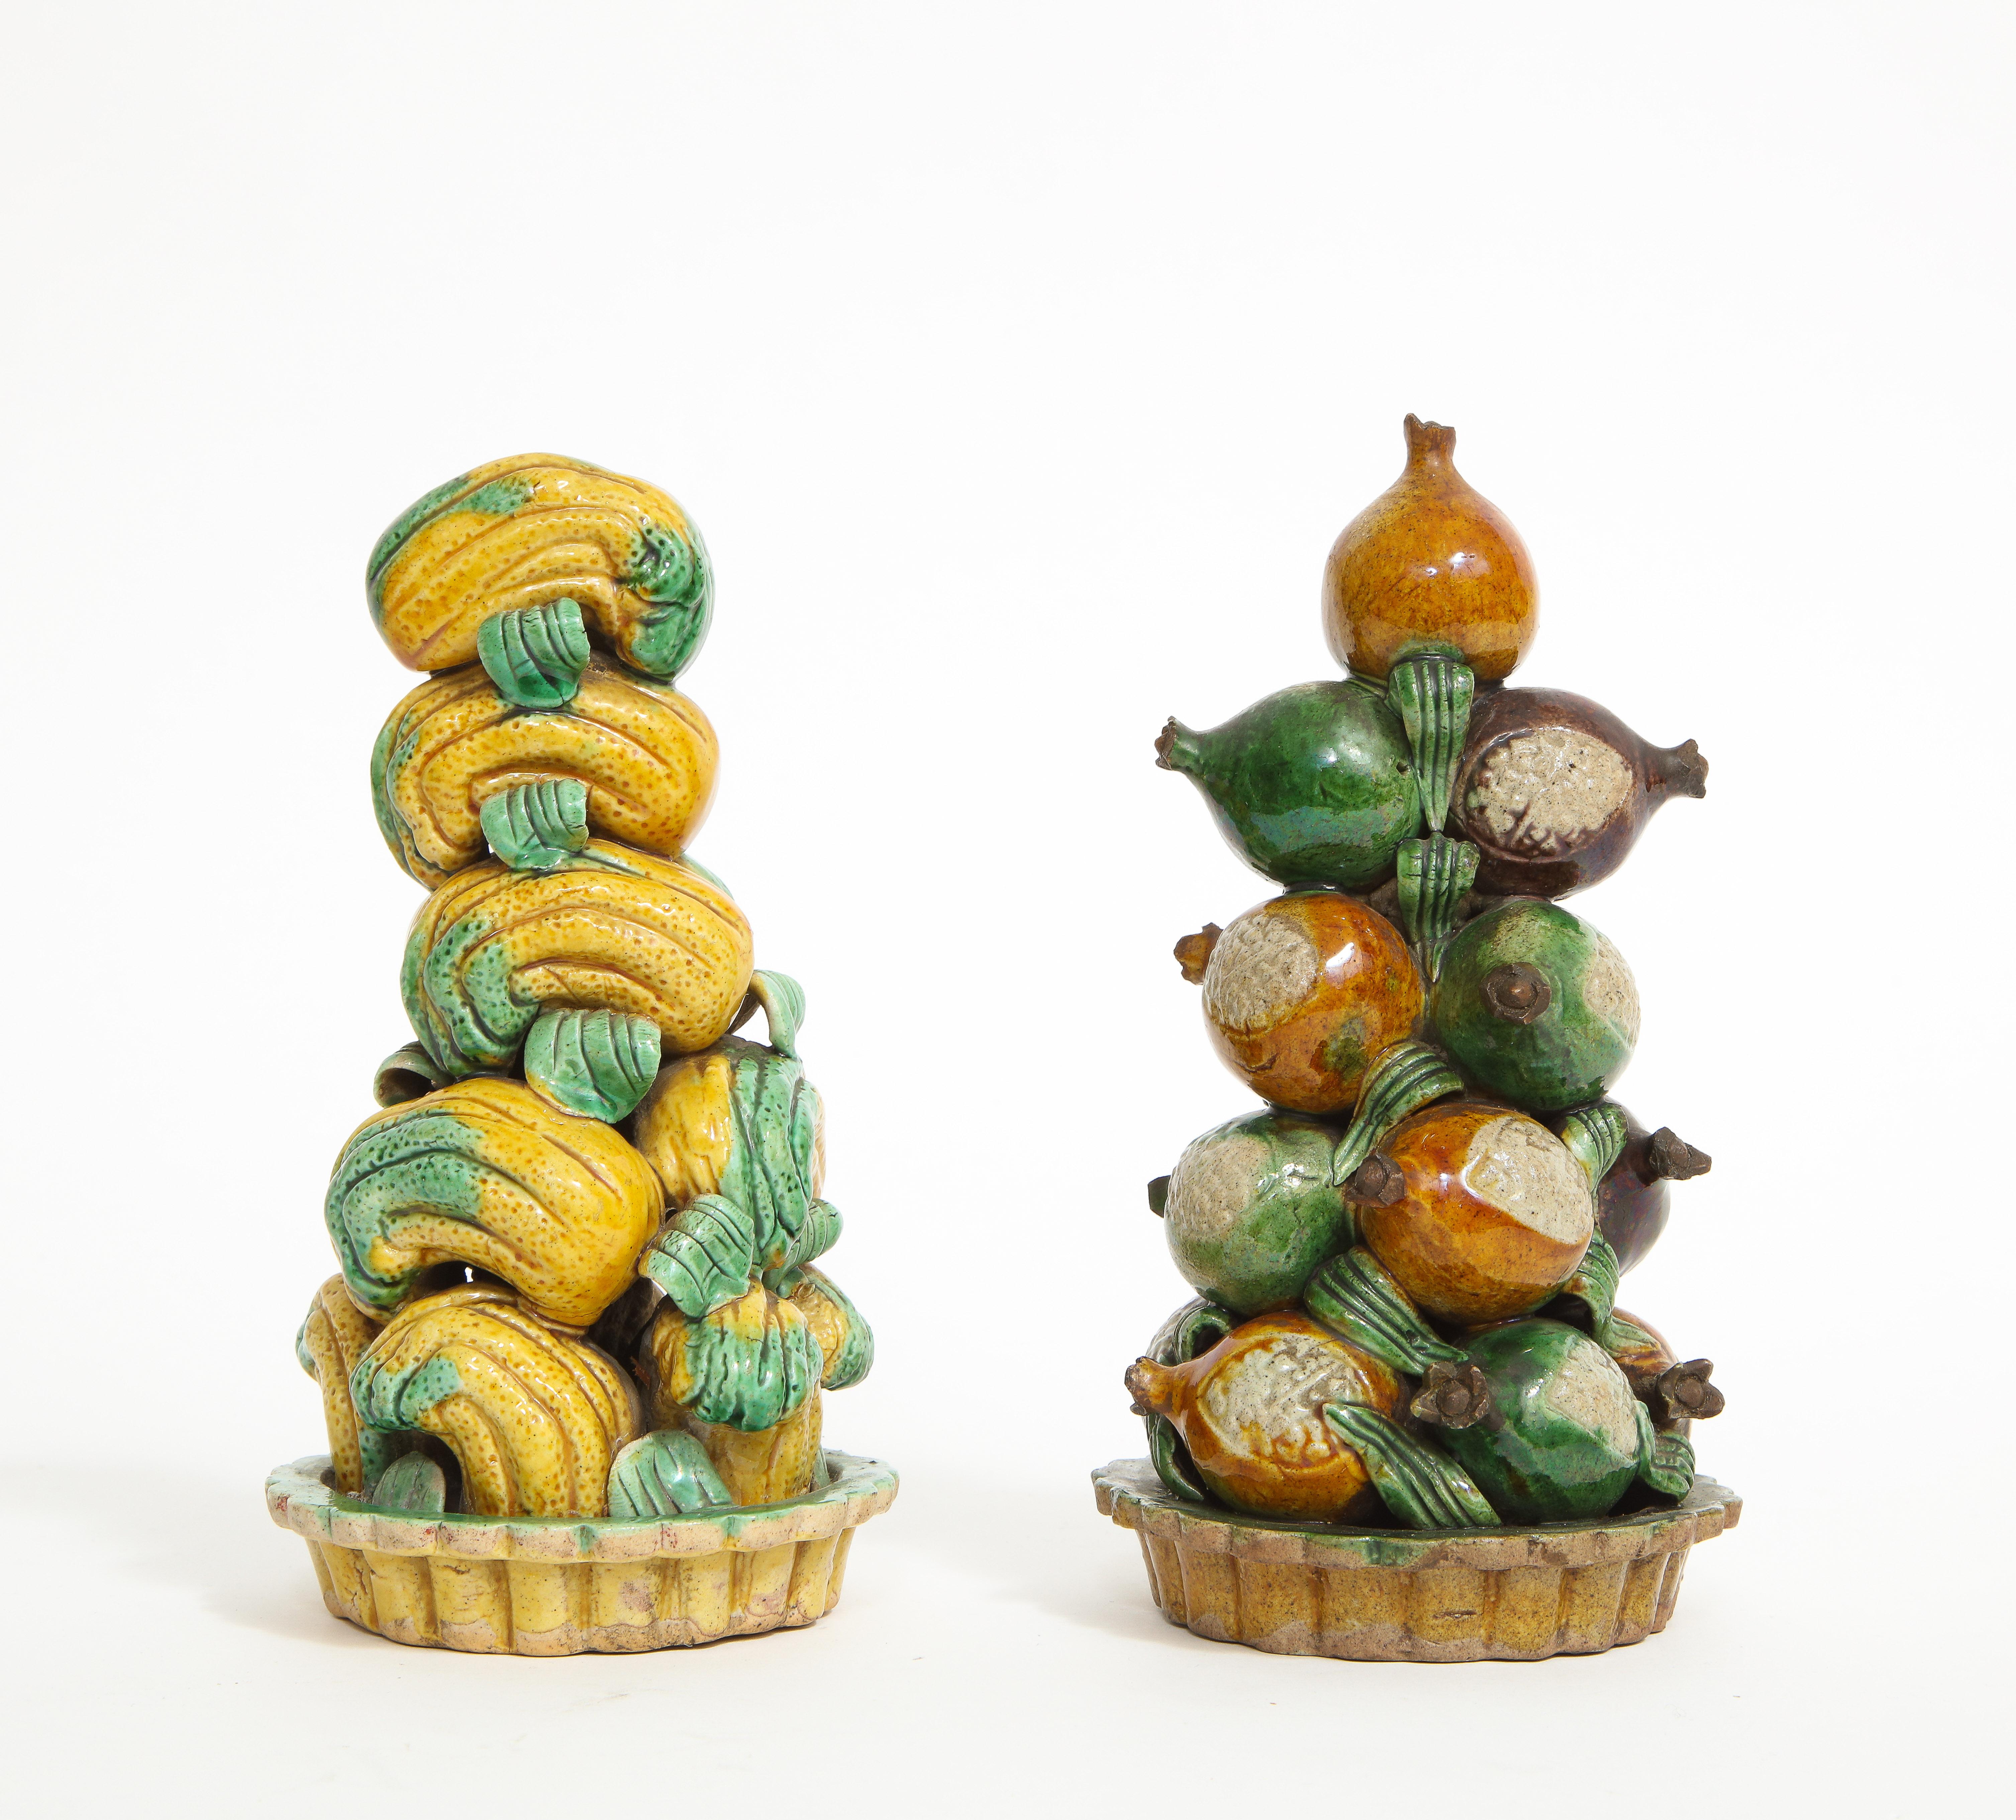 Two fantastic and rare Chinese Kangxi Period porcelain fruit stands, Representing Buddhas Hand & Pomegranates. Each of these is beautifully hand-carved and hand-painted with the finest enamels available in the 1700s. Kangxi porcelain items are known